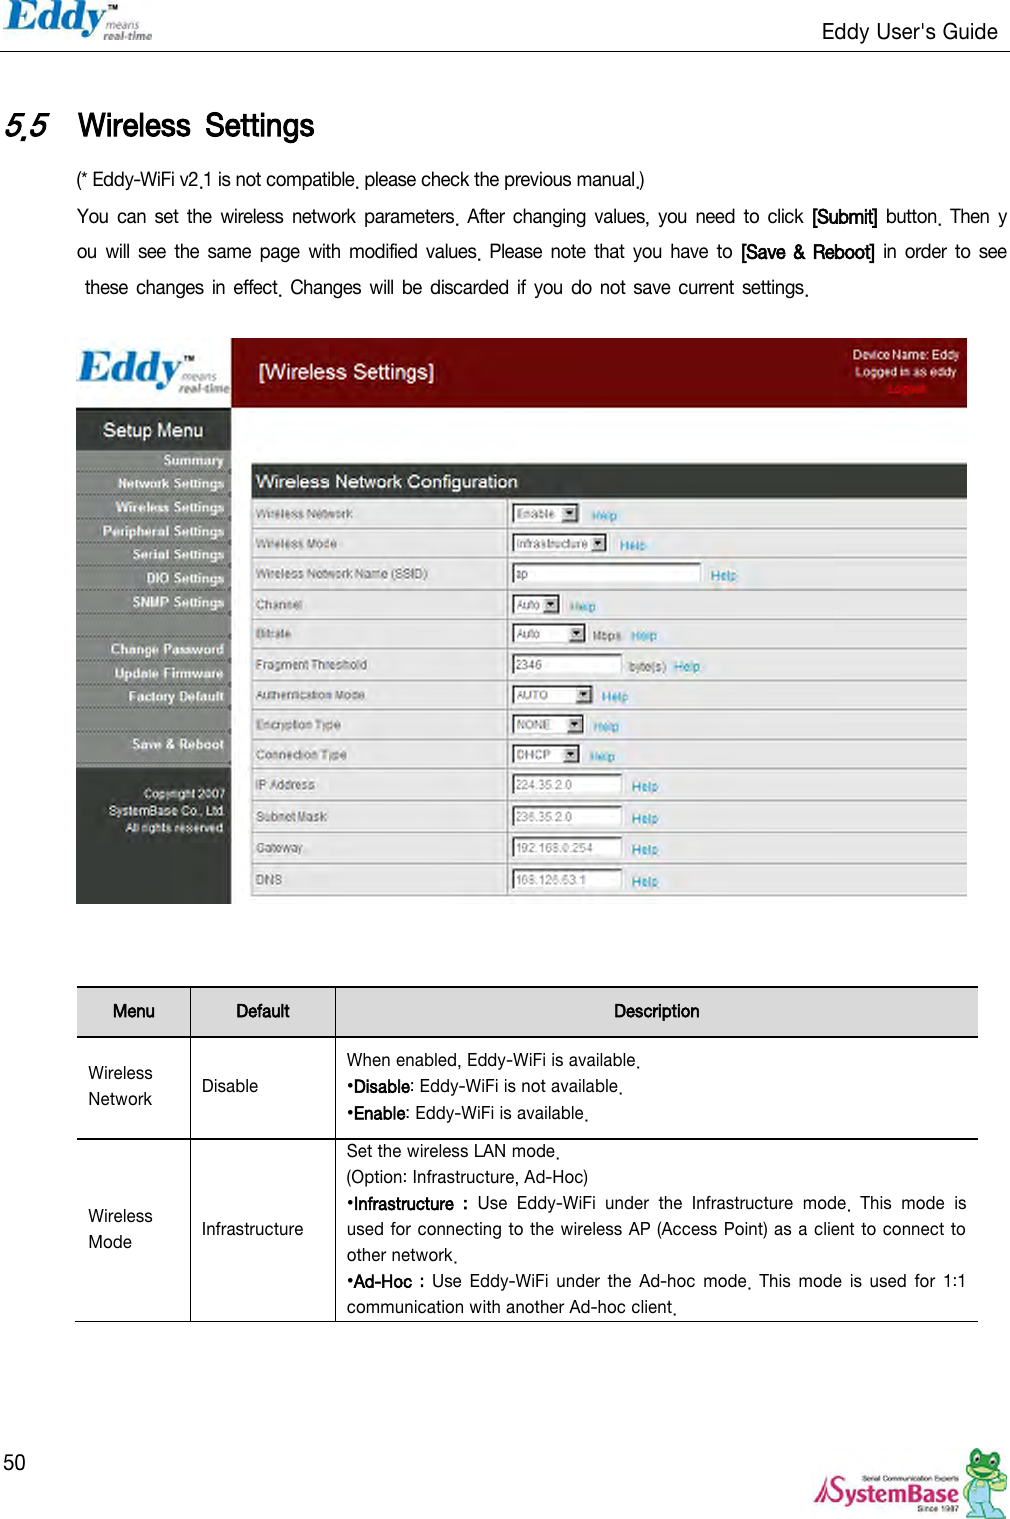                                                                   Eddy User&apos;s Guide   50  5.5 Wireless  Settings (* Eddy-WiFi v2.1 is not compatible. please check the previous manual.) You can set the wireless  network parameters. After  changing  values, you  need to  click [Submit] button.  Then  you  will see the same page  with  modified values. Please note  that  you have to [Save &amp; Reboot]  in  order to  see these changes in effect. Changes  will be discarded if  you  do not save current settings.     Menu Default Description Wireless Network Disable When enabled, Eddy-WiFi is available. •Disable: Eddy-WiFi is not available. •Enable: Eddy-WiFi is available. Wireless Mode Infrastructure Set the wireless LAN mode. (Option: Infrastructure, Ad-Hoc) •Infrastructure  :  Use  Eddy-WiFi  under  the  Infrastructure  mode.  This  mode  is used for connecting to the wireless AP (Access Point) as a client to connect to other network. •Ad-Hoc :  Use  Eddy-WiFi  under the  Ad-hoc  mode.  This  mode is  used  for  1:1 communication with another Ad-hoc client. 